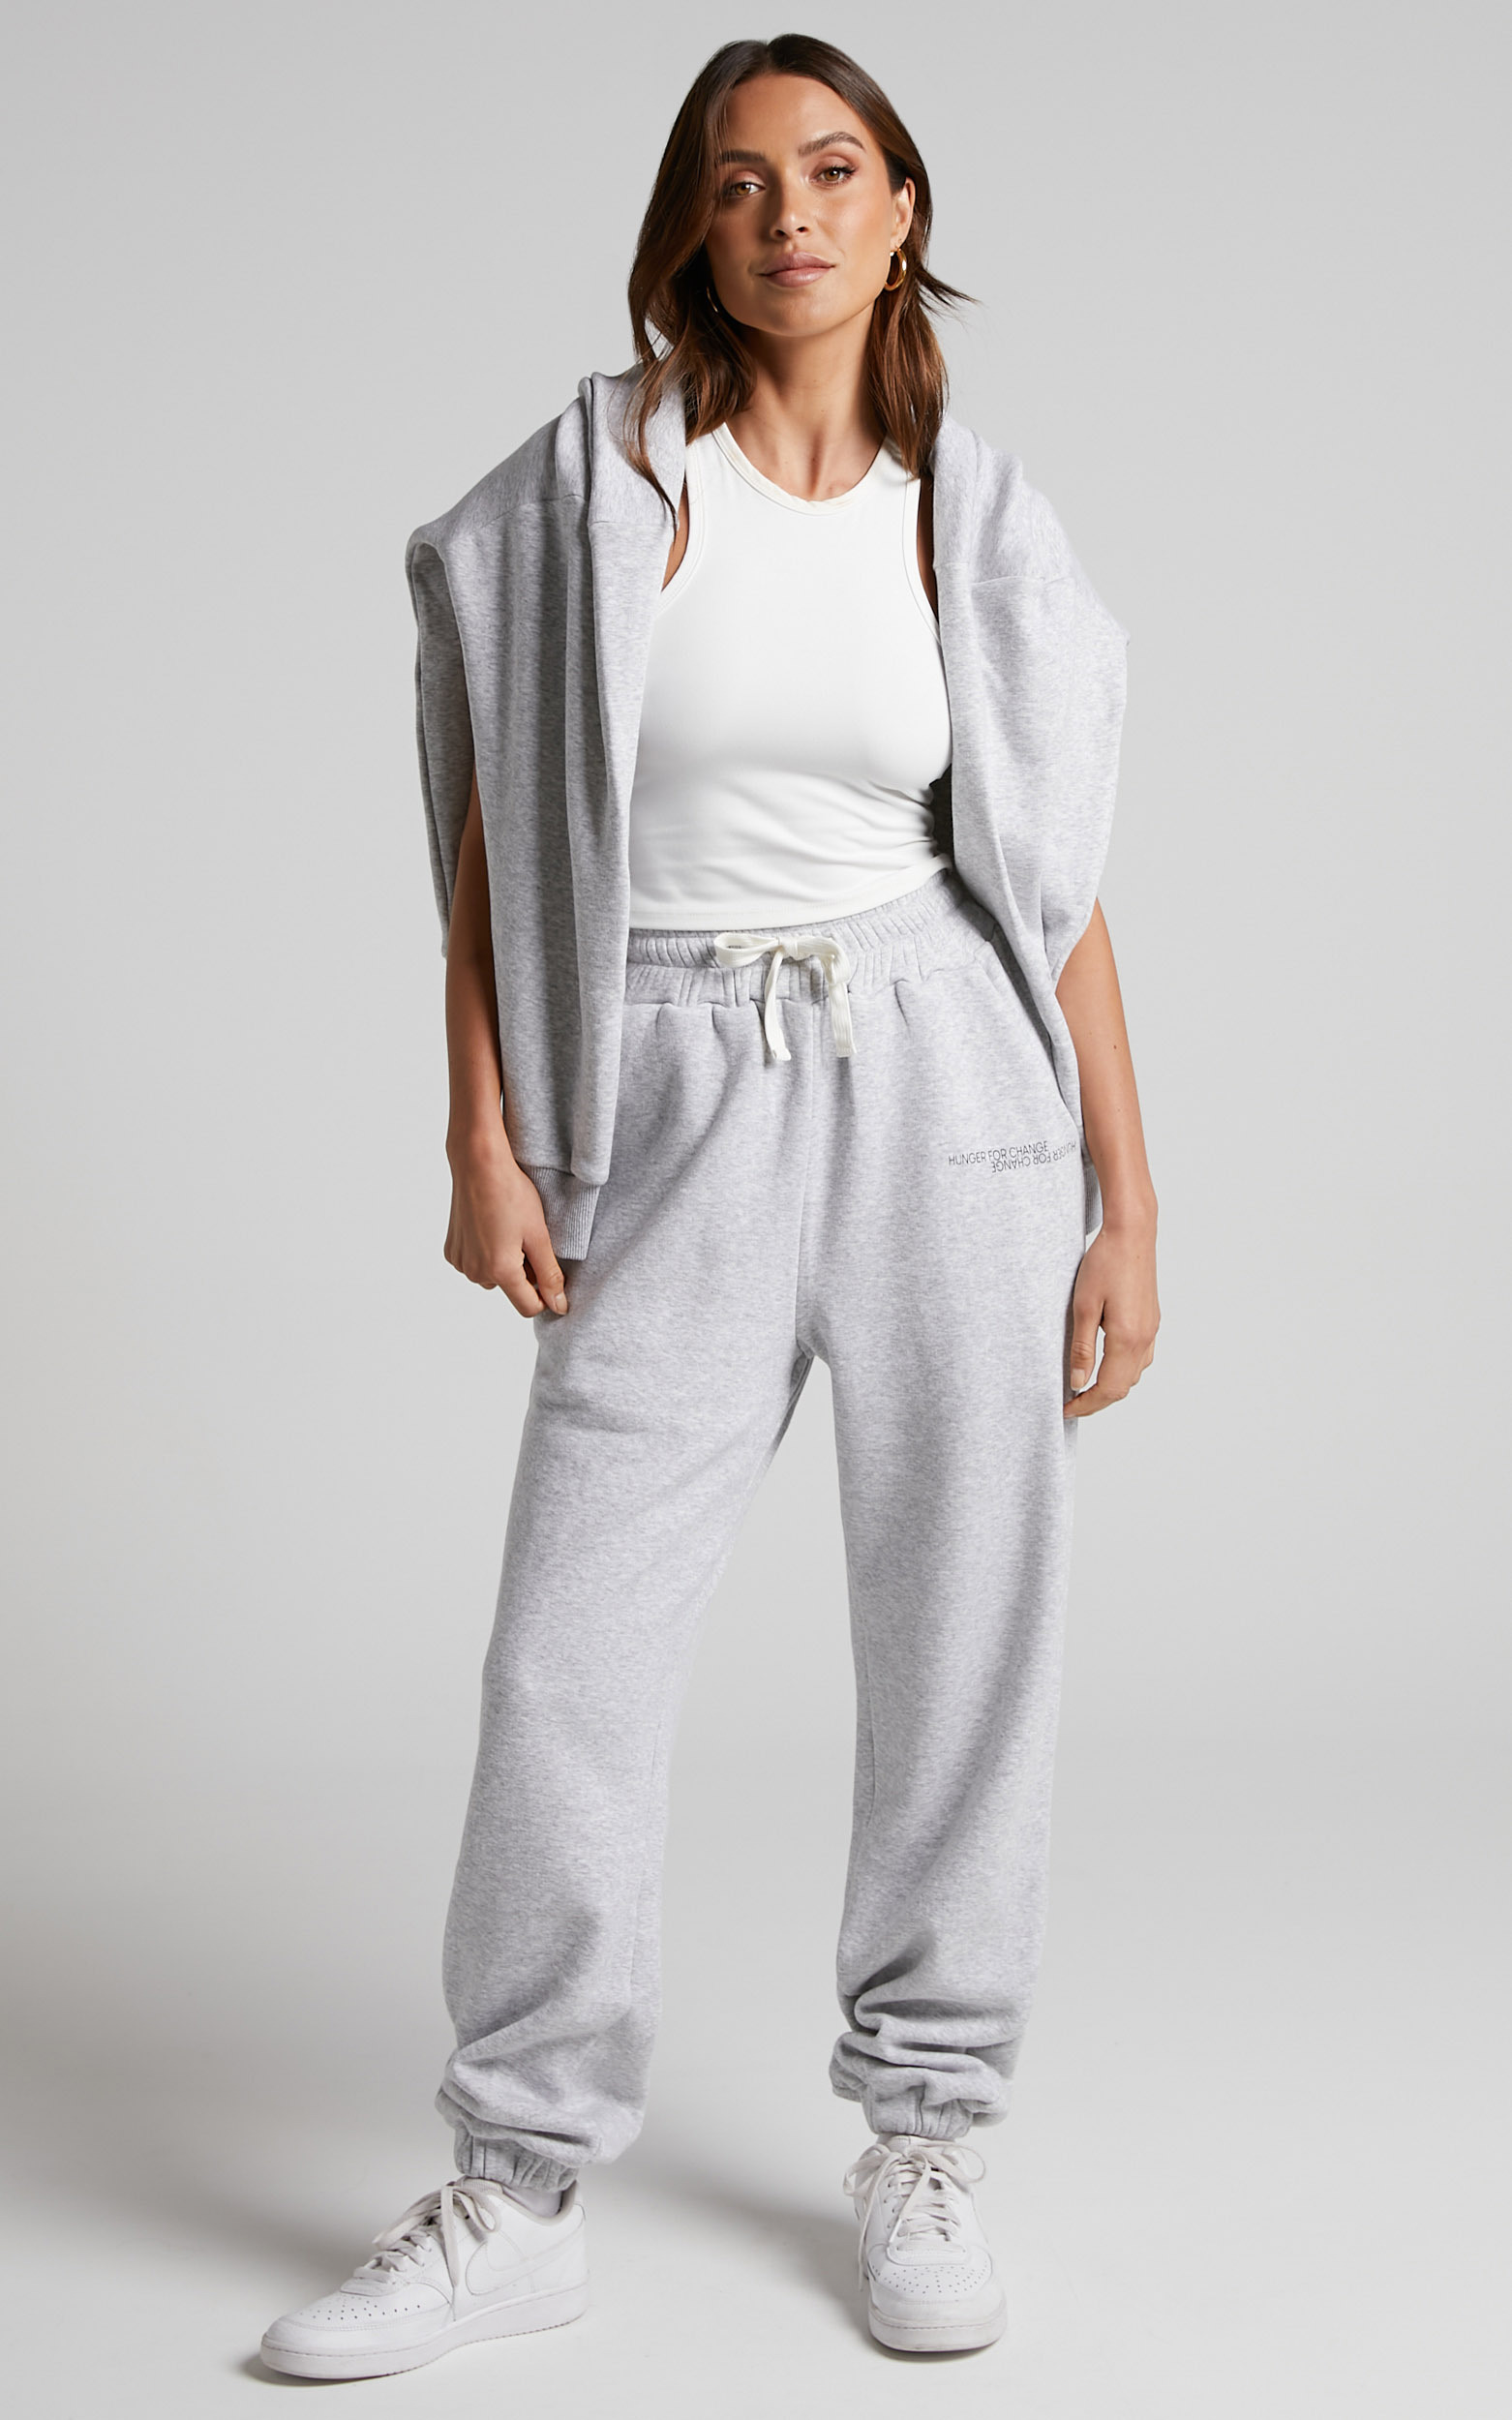 The Hunger Project x Showpo Mid Waisted  Sweatpants in Grey - L/XL, GRY2, hi-res image number null